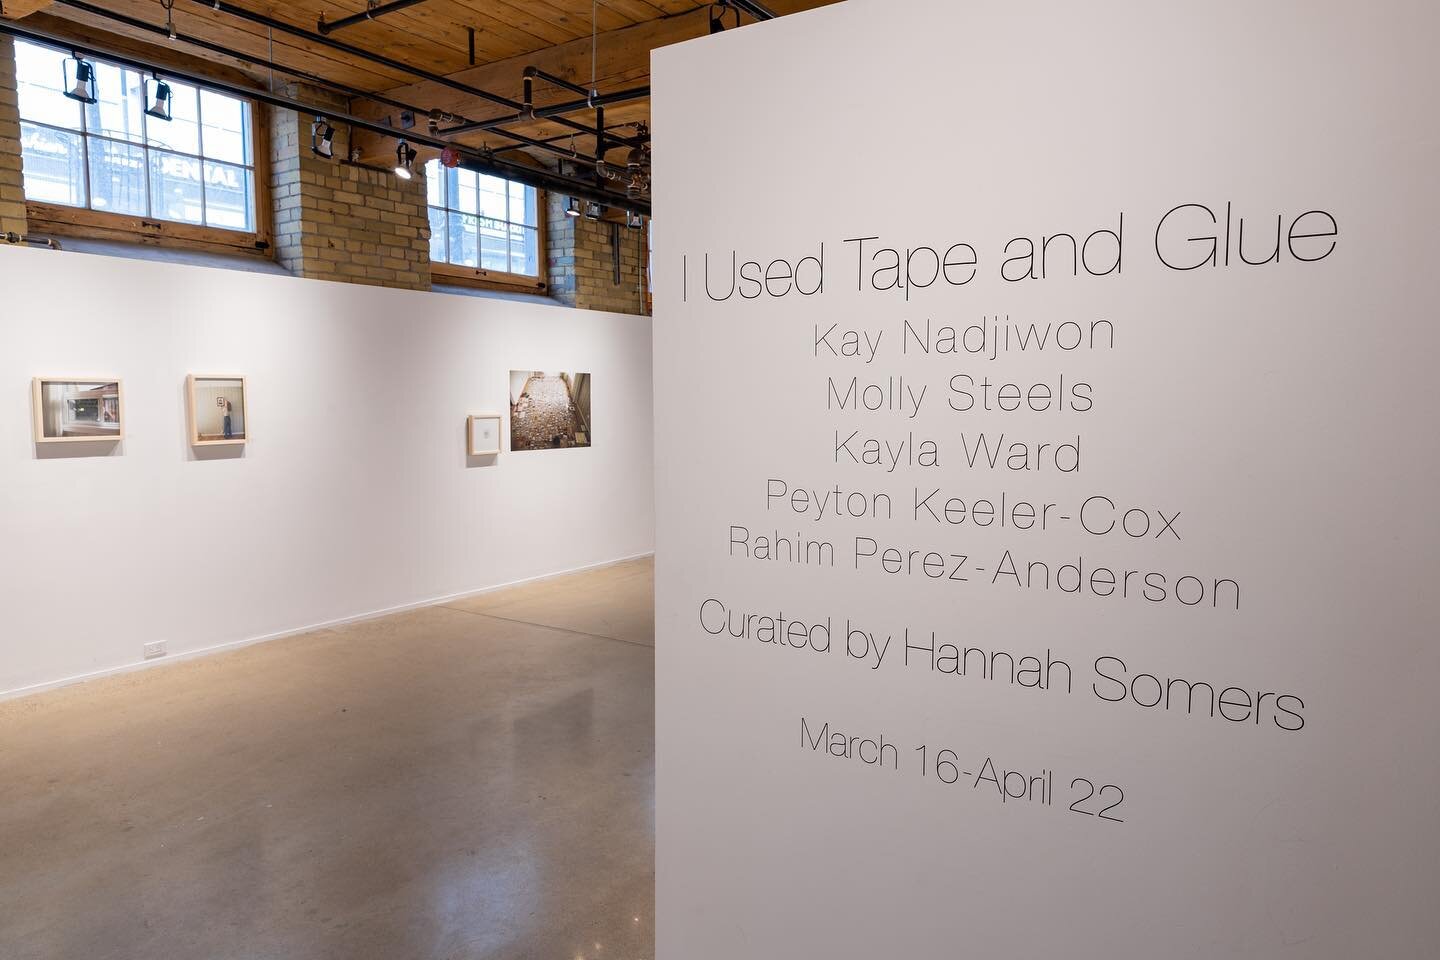 I Used Tape &amp; Glue is a group exhibition curated by Hannah Somers @hansom_ers featuring current students from TMU&rsquo;s School of Image Arts Photography Program: Kayla Ward @__kaylaward__, Kay Nadjiwon @aanikoobijigan, Molly Steels @molly_steel